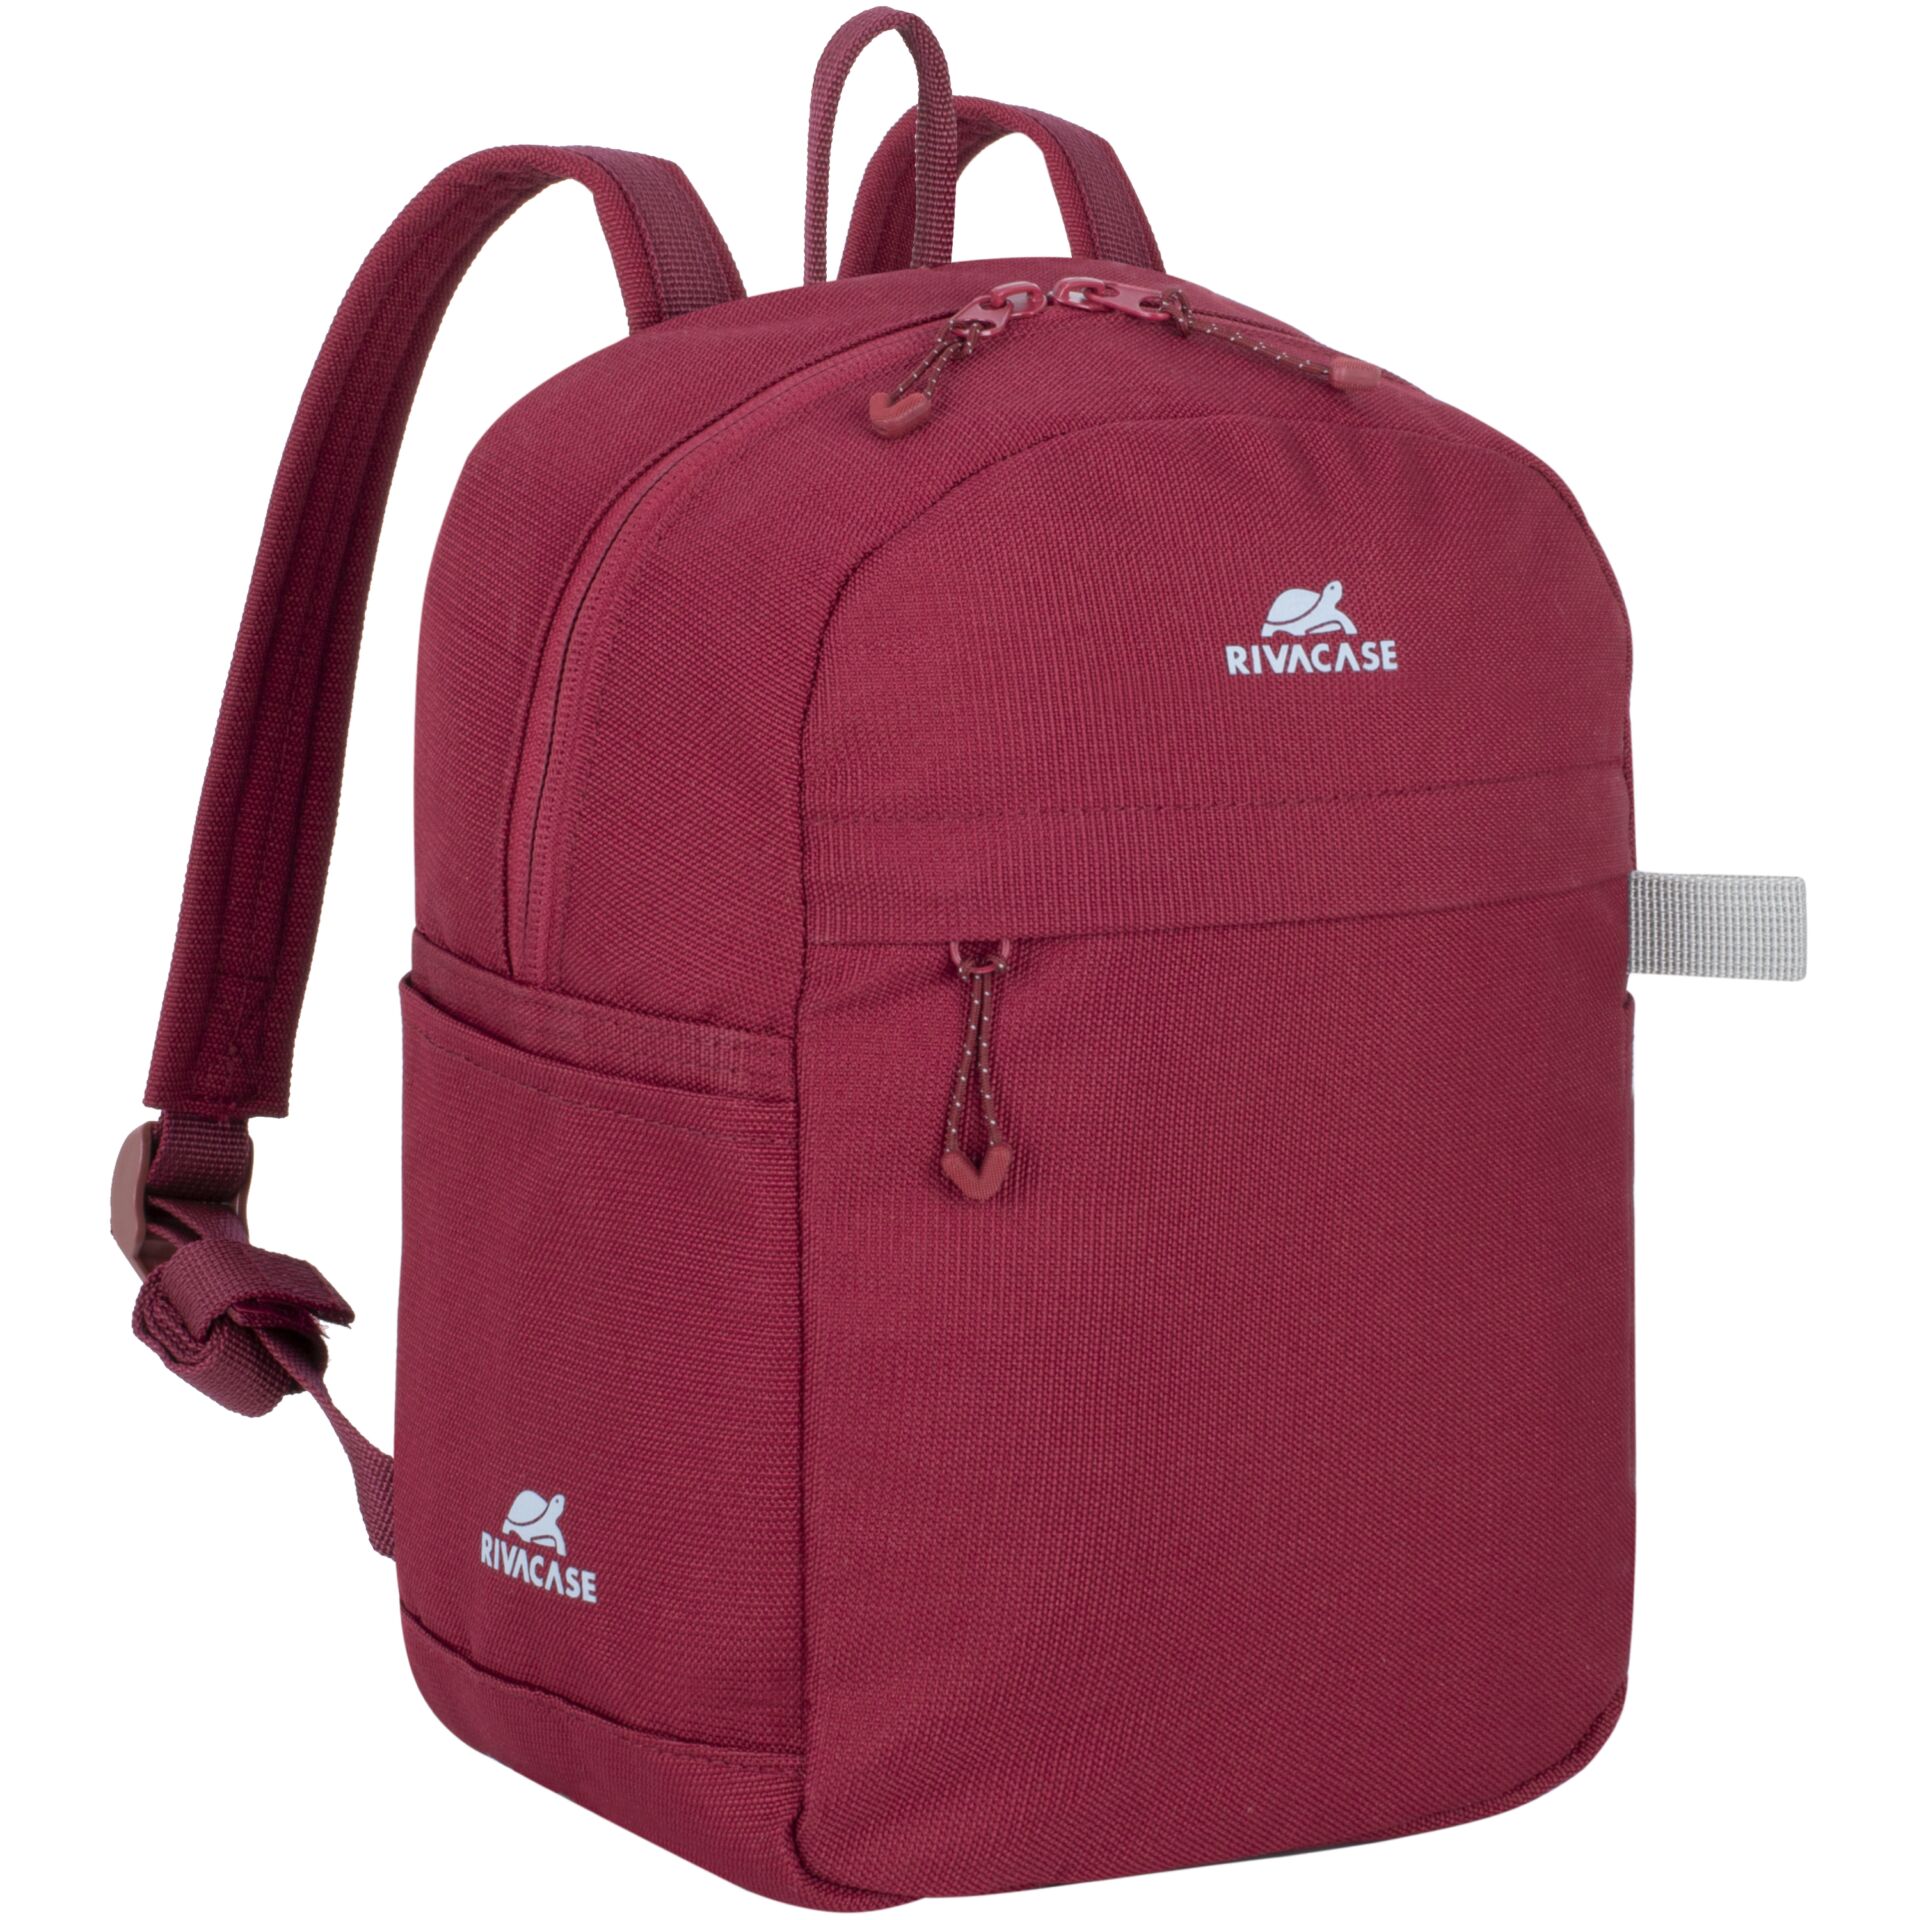 Rivacase 5422 Red Small Urban Backpack 6l